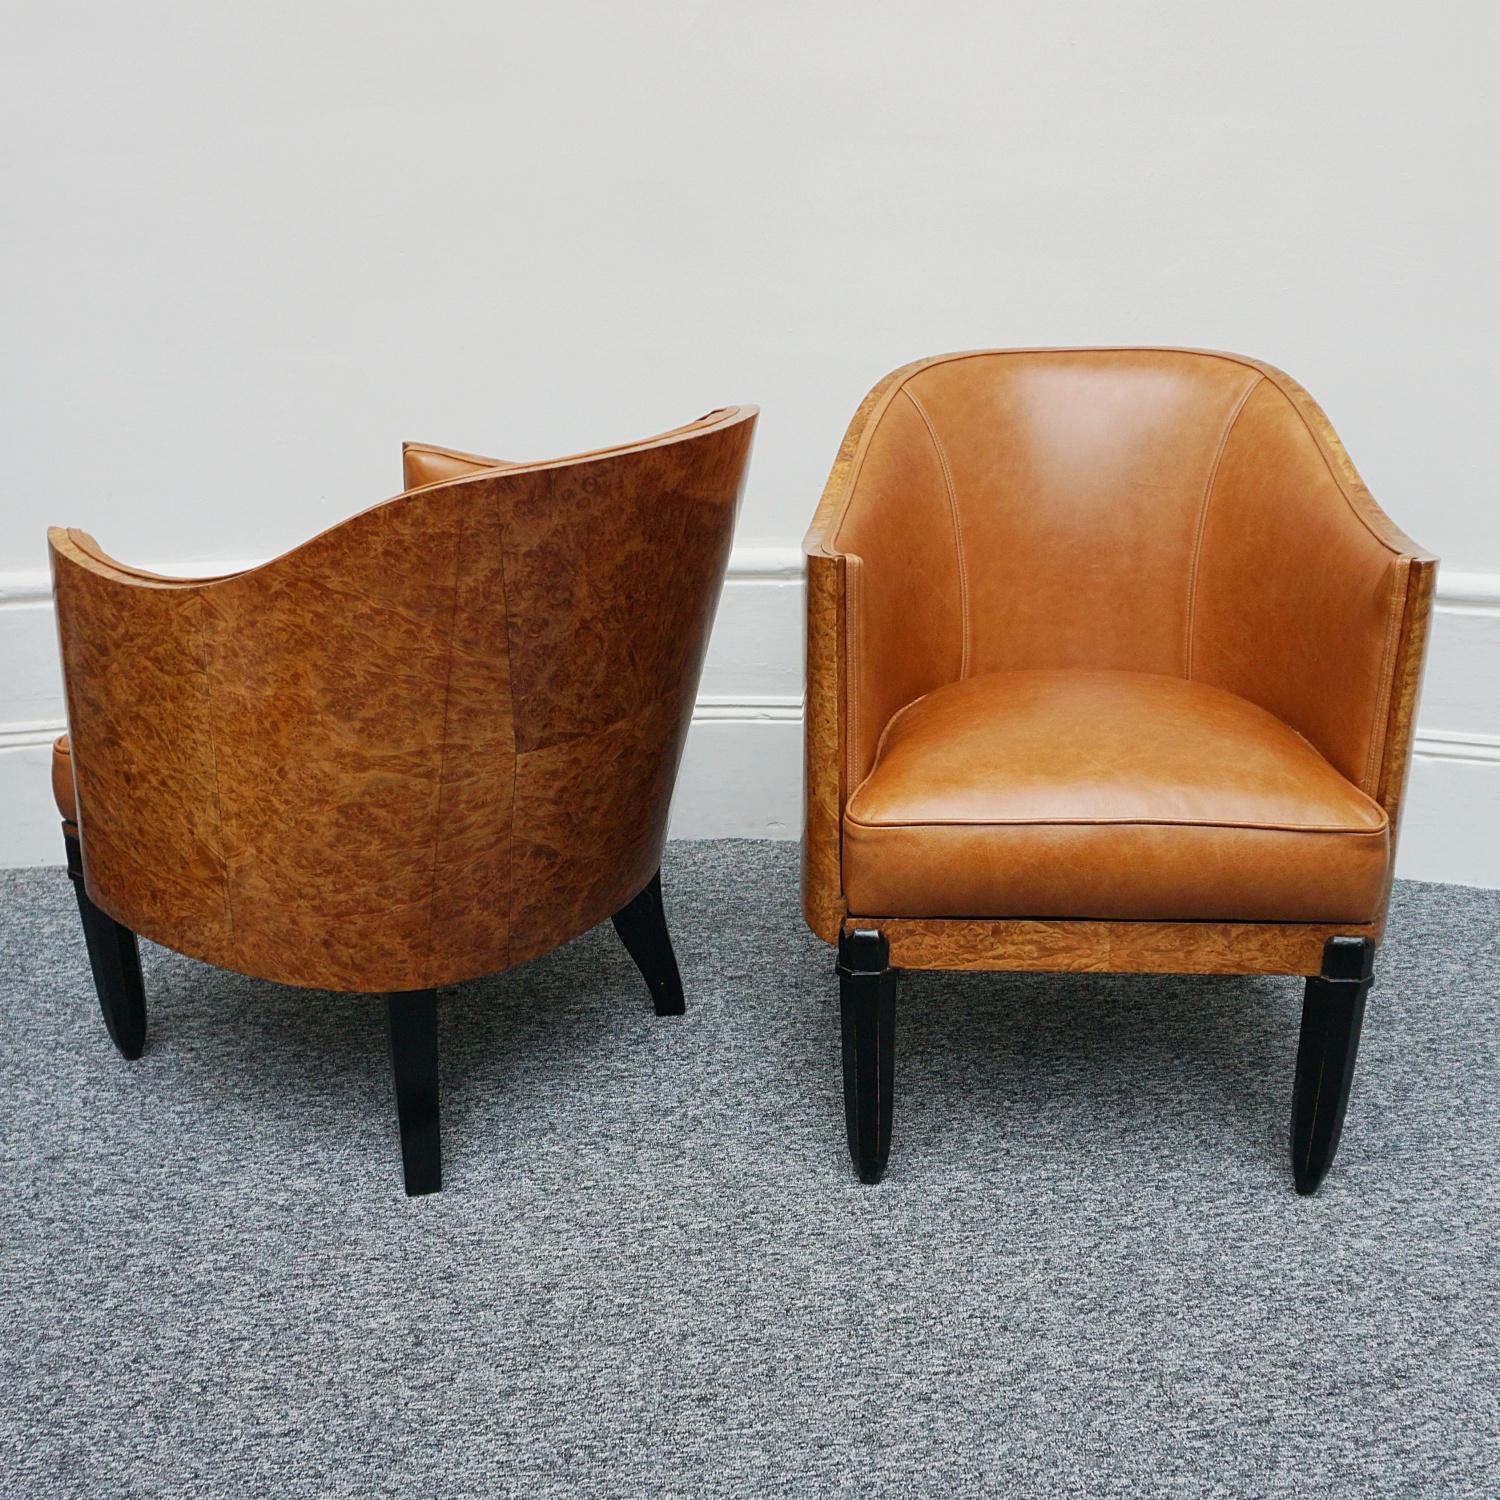 Original Pair of Walnut and Leather Art Deco Club Chairs  13